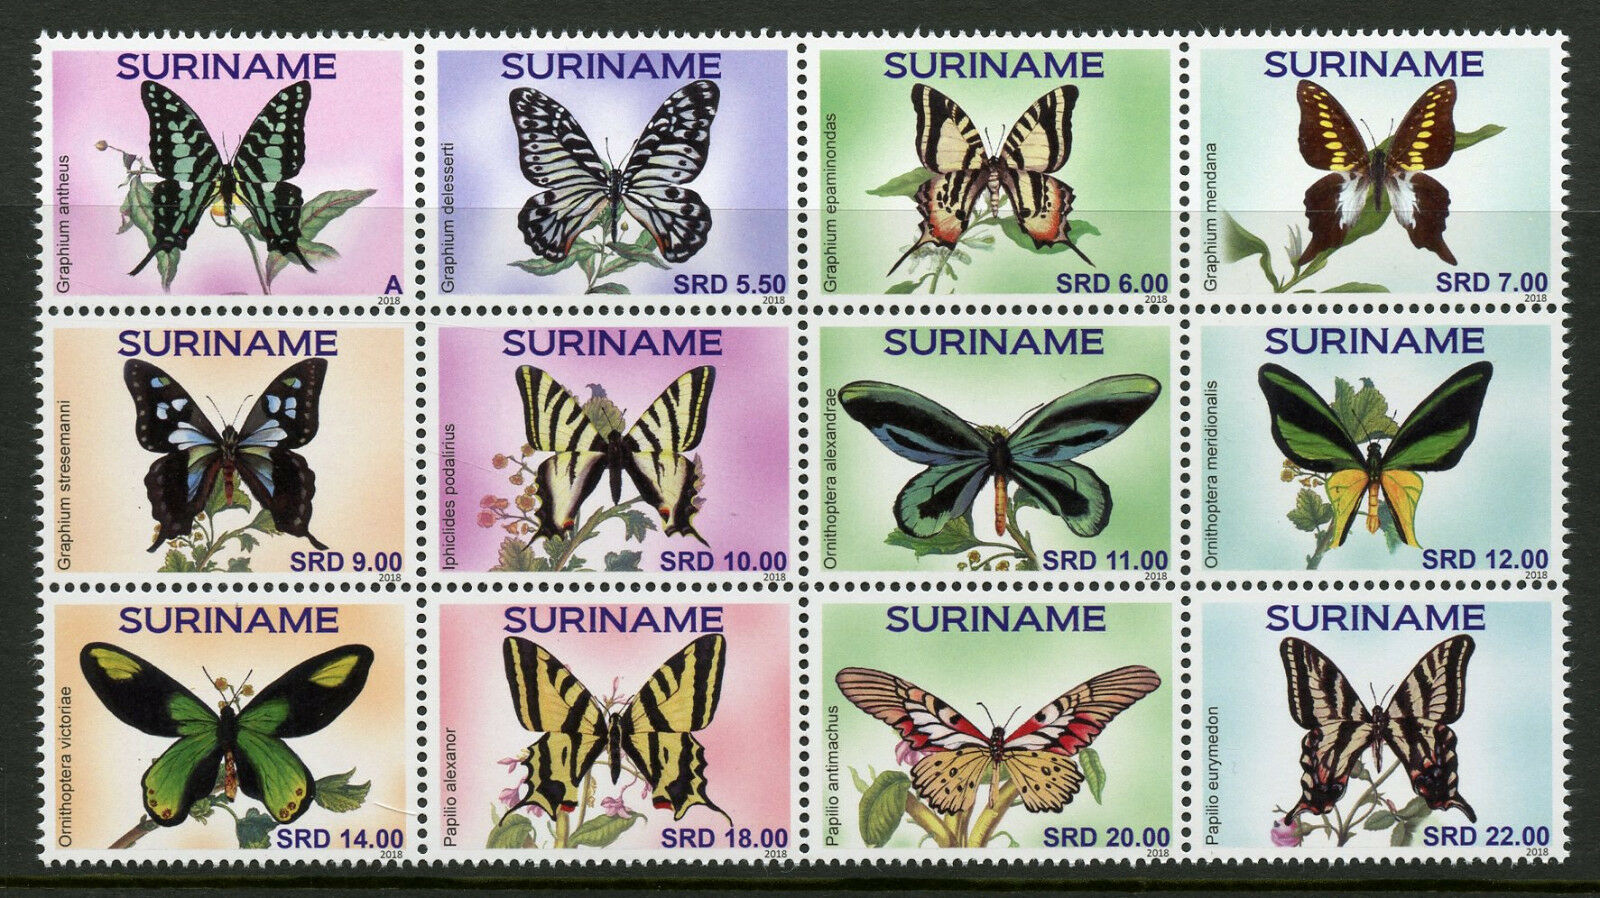 Suriname Butterflies Stamps 2018 MNH Butterfly Vlinders Insects 12v Block